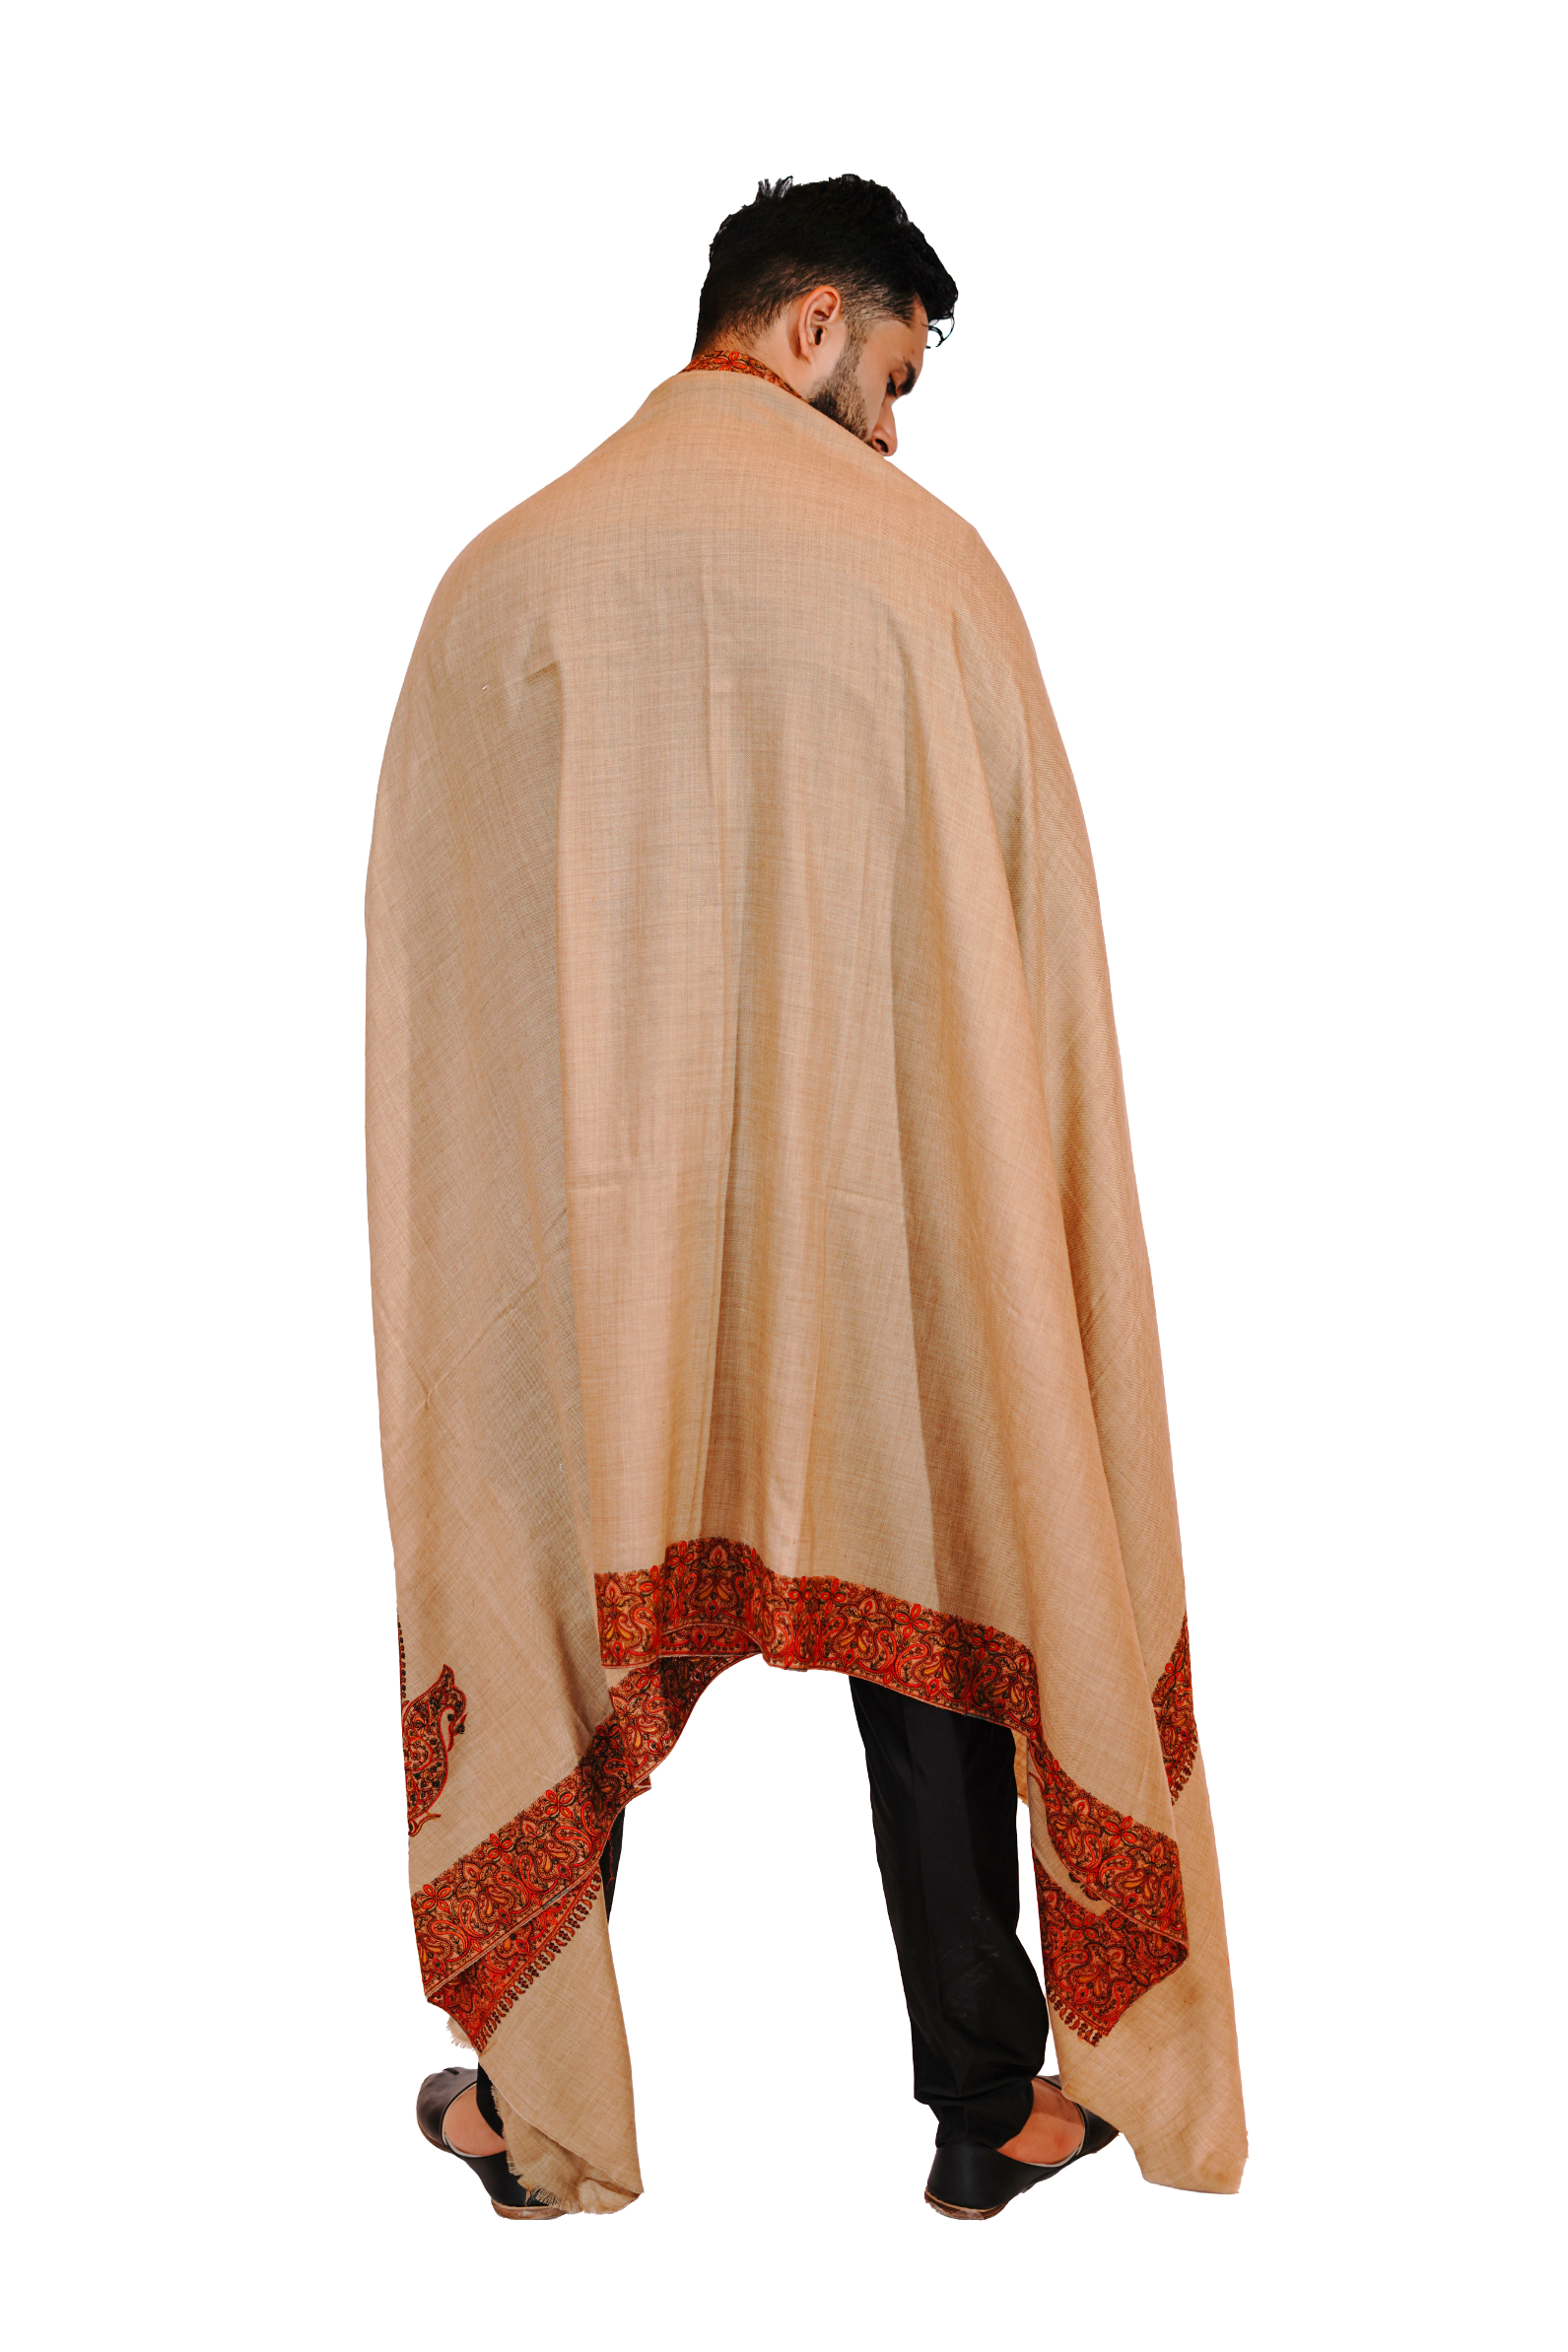 Hand-Embroidered Wool Blend Shawl for Men – Creamy Crimson/Bare luxury